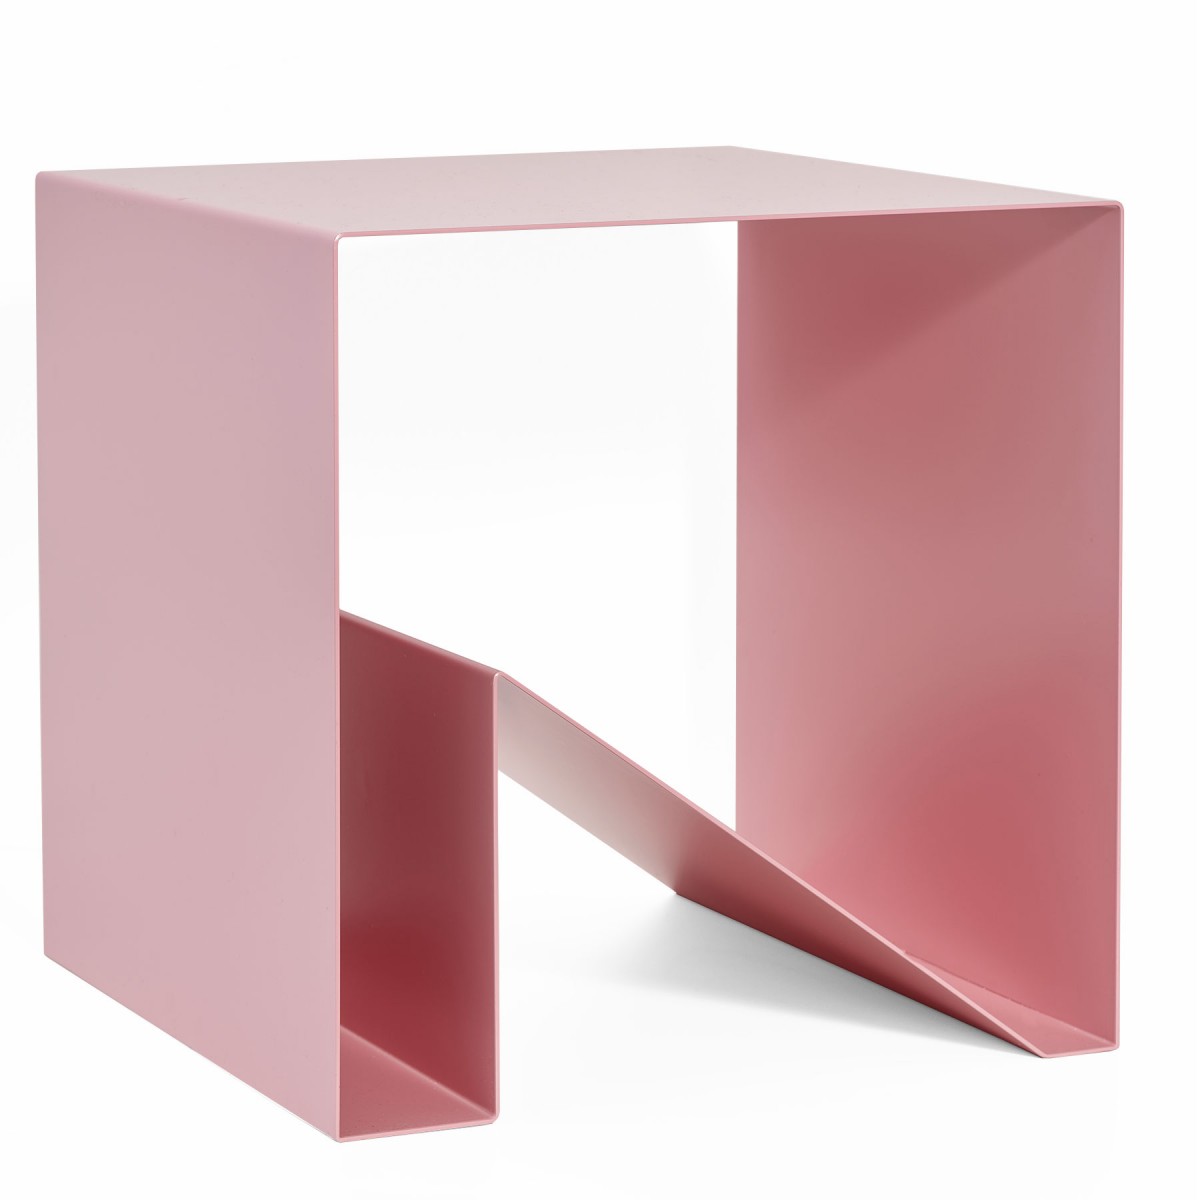 mused - CUBO - light pink